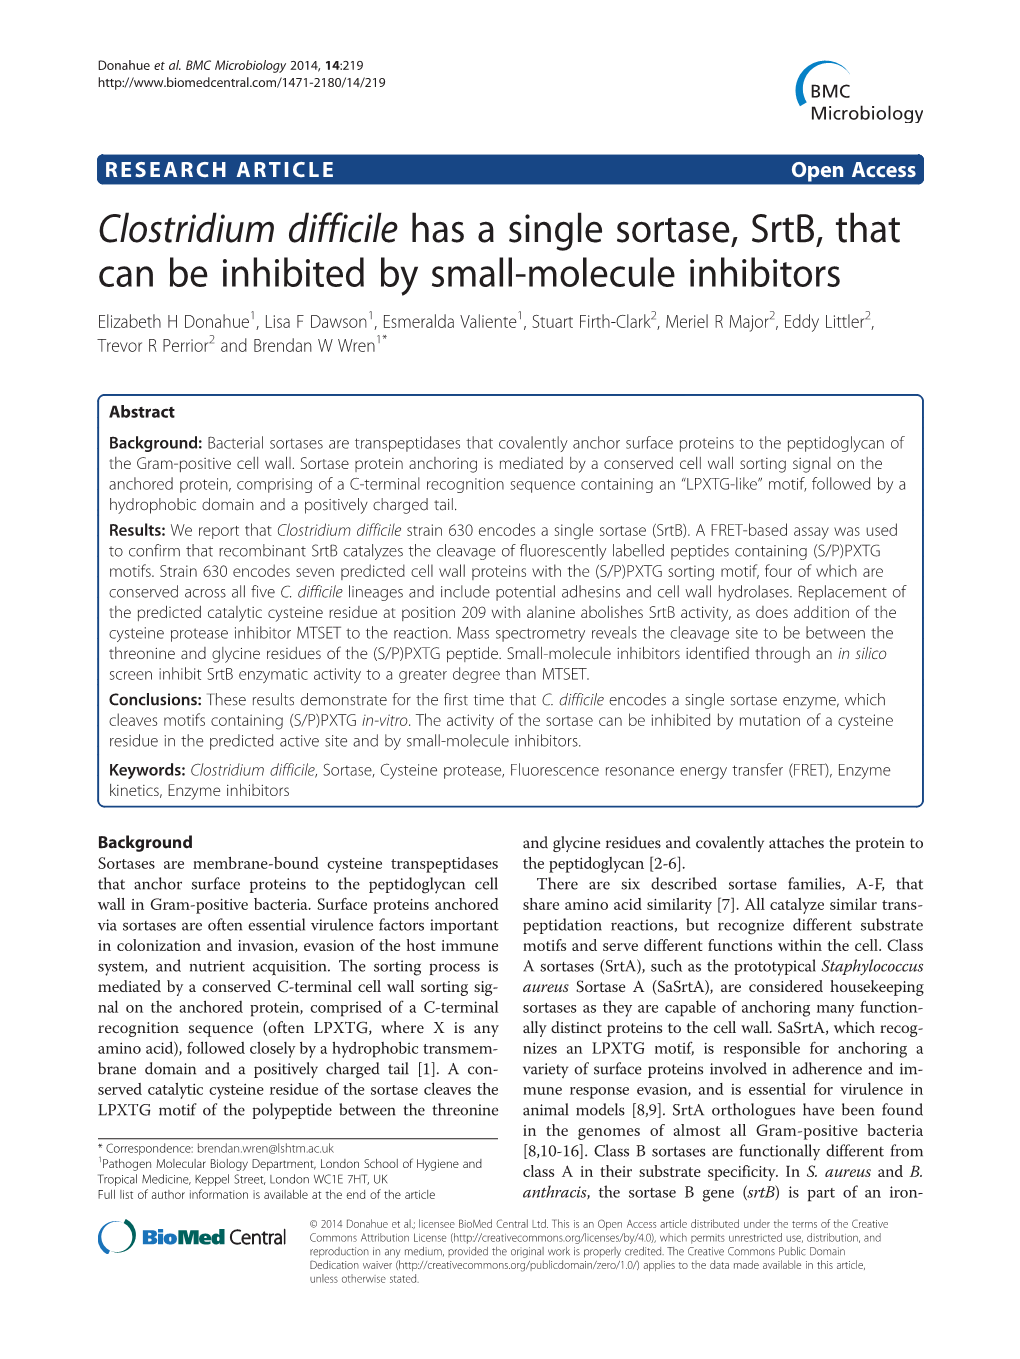 Clostridium Difficile Has a Single Sortase, Srtb, That Can Be Inhibited by Small-Molecule Inhibitors